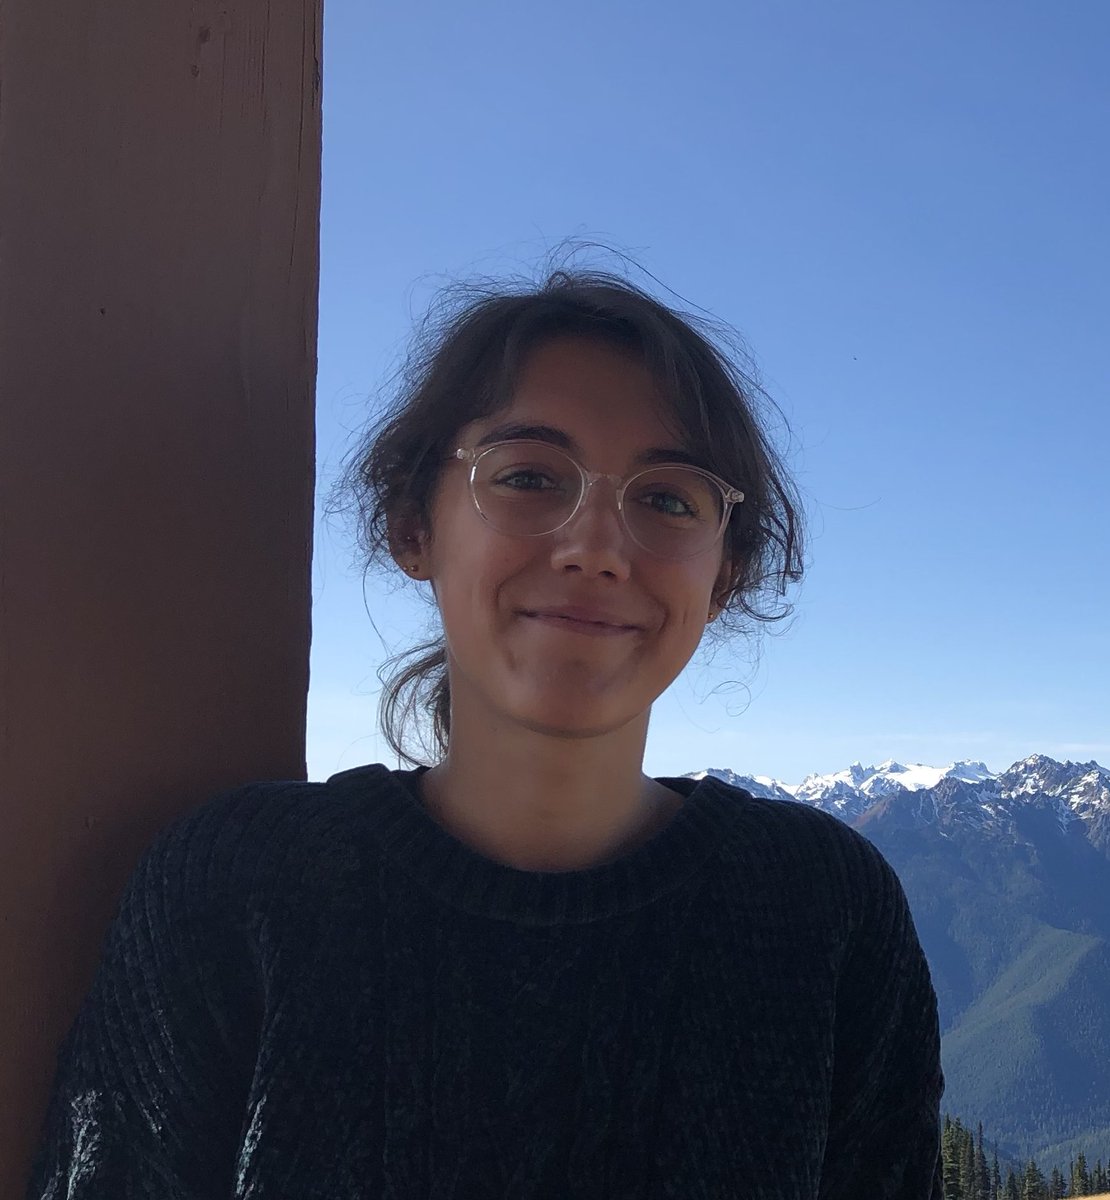 We are pleased to introduce Aleksandra Nielsen, a new student @berlickilab. Aleksandra was accepted into the BioLAB Program by the Polish-U.S. Fulbright Commission (@FulbrightPolska), which resulted in her one-year stay at the @UTSWNews. Now she will work on #peptide #foldamers.